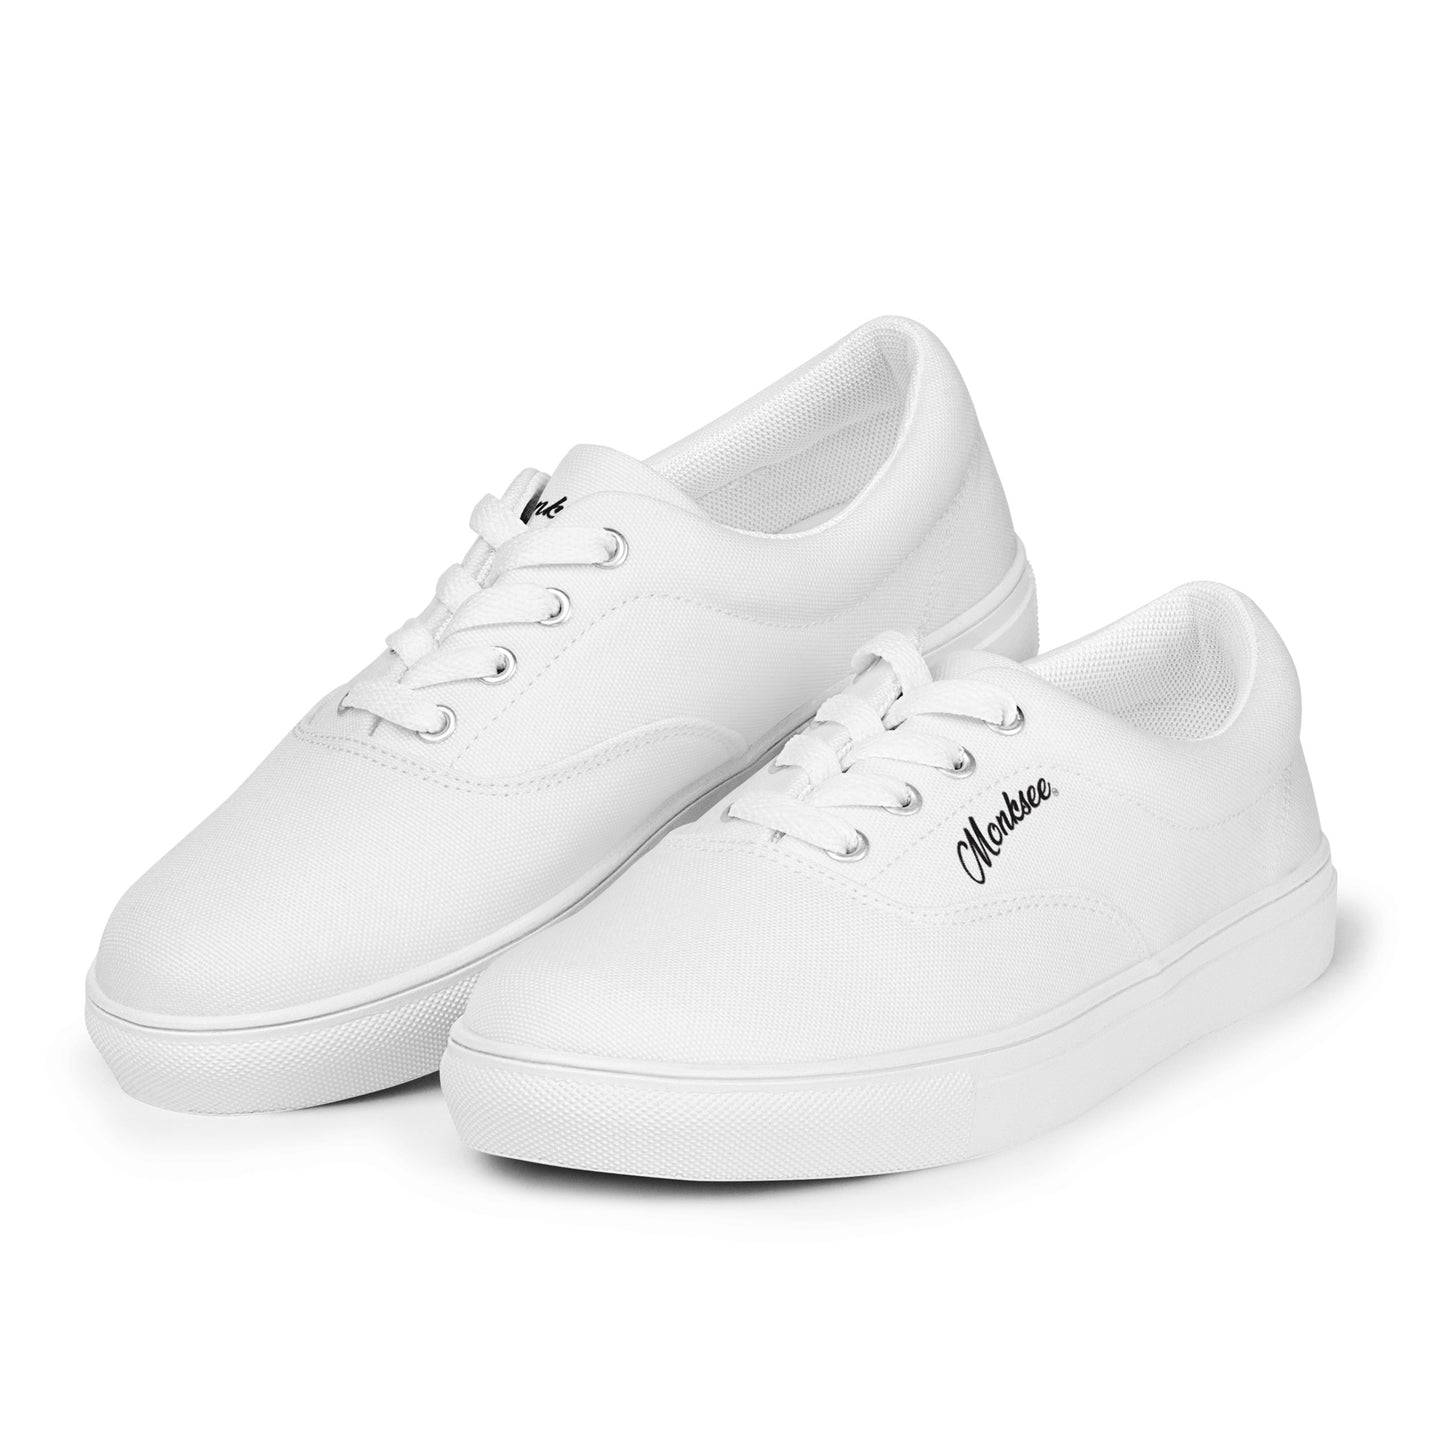 Stoked white - Men's Canvas shoes